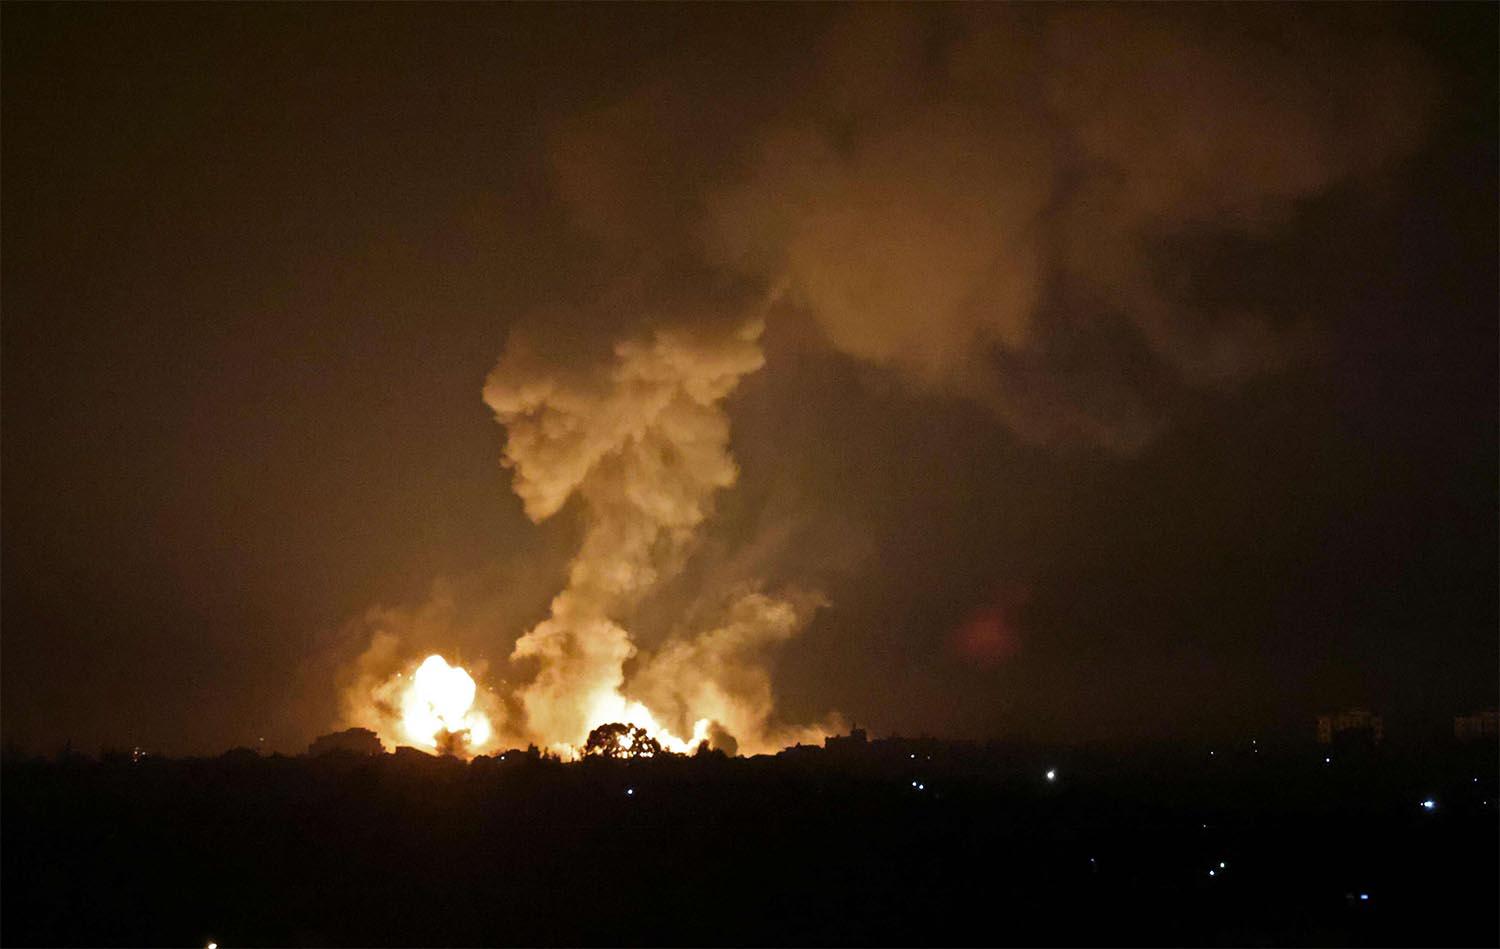 The ceasefire has been fragile but largely held since the 11-day war between Hamas and Israel in May